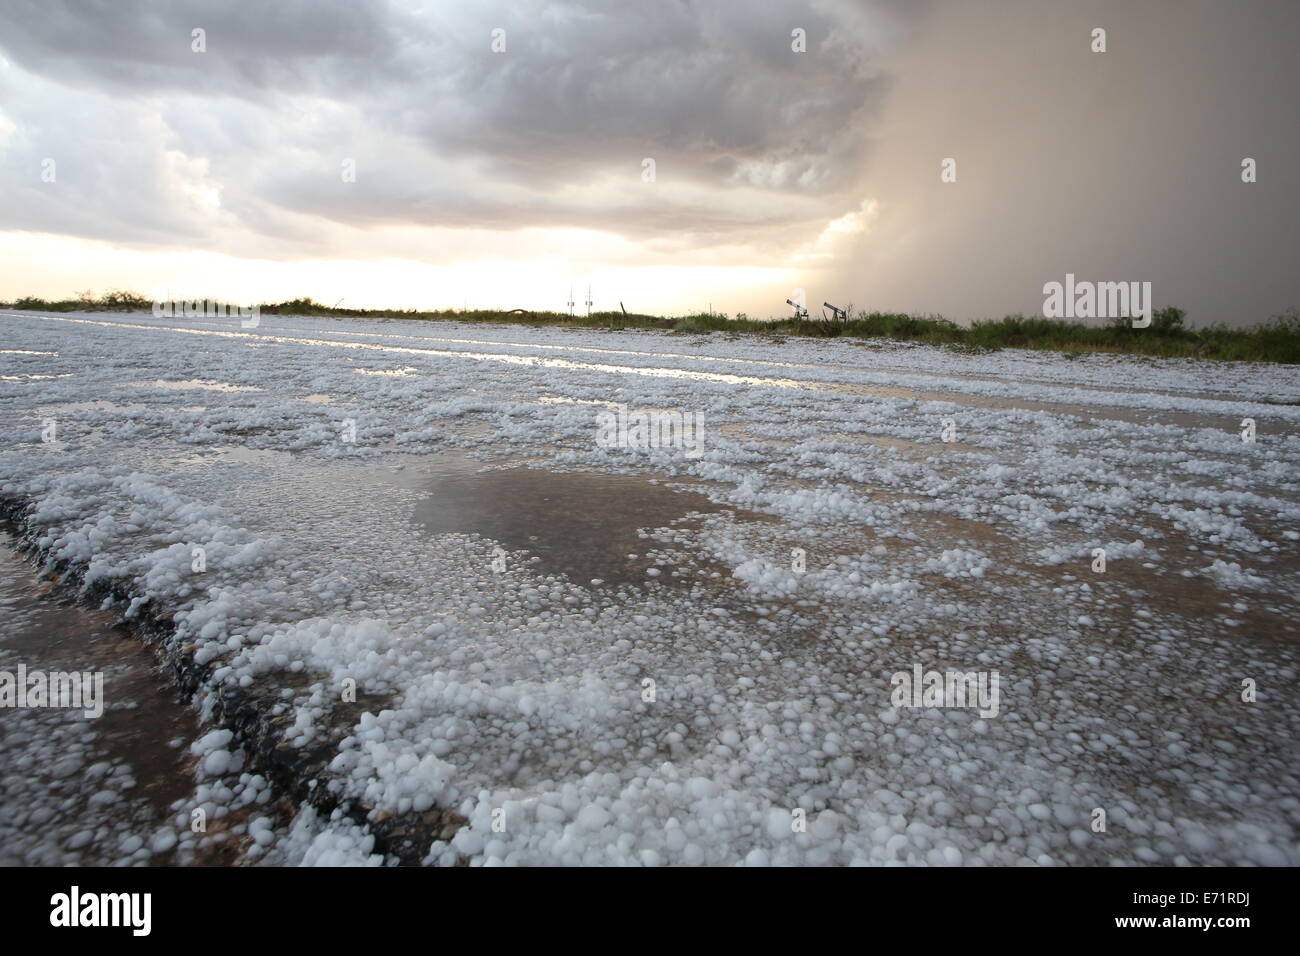 Hail covering a road after a storm near Carlsbad, New Mexico Stock Photo